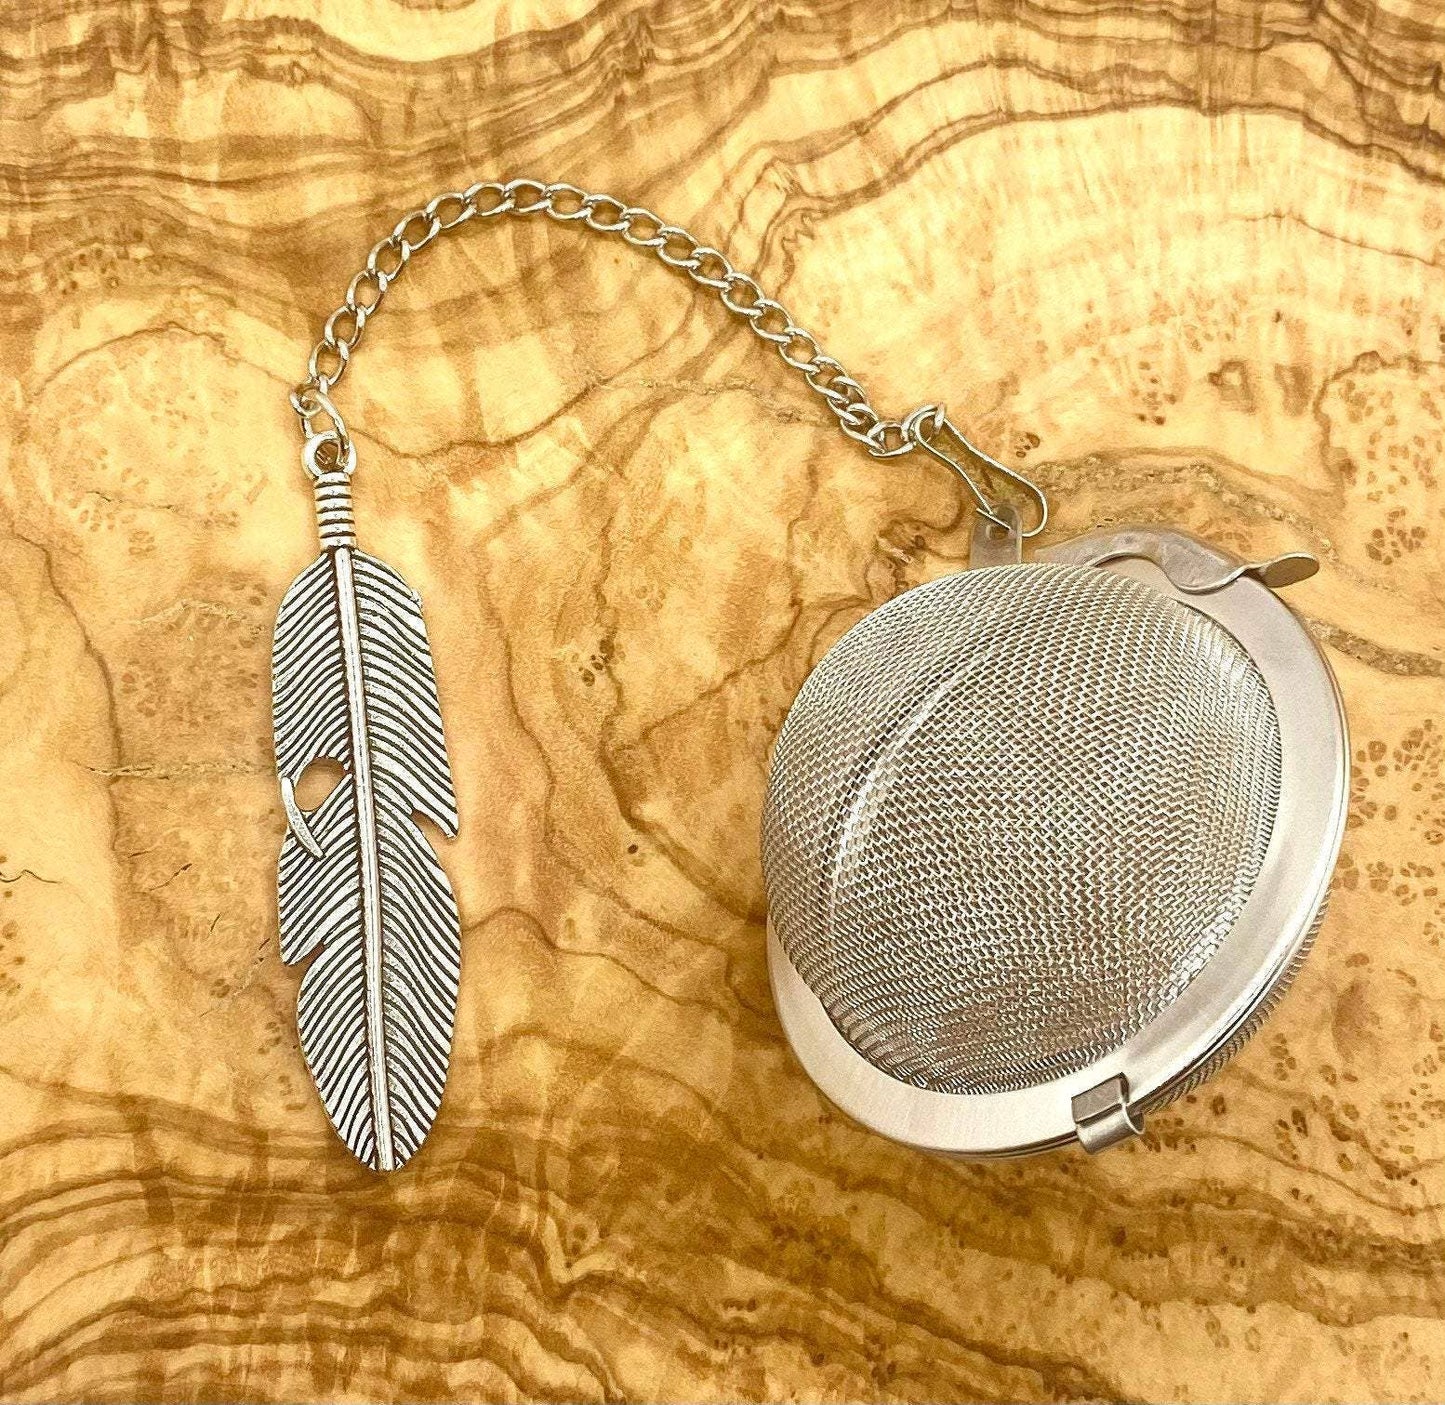 Loose Leaf Tea Infuser, Feather Charm Ball, Tea Lover Gift